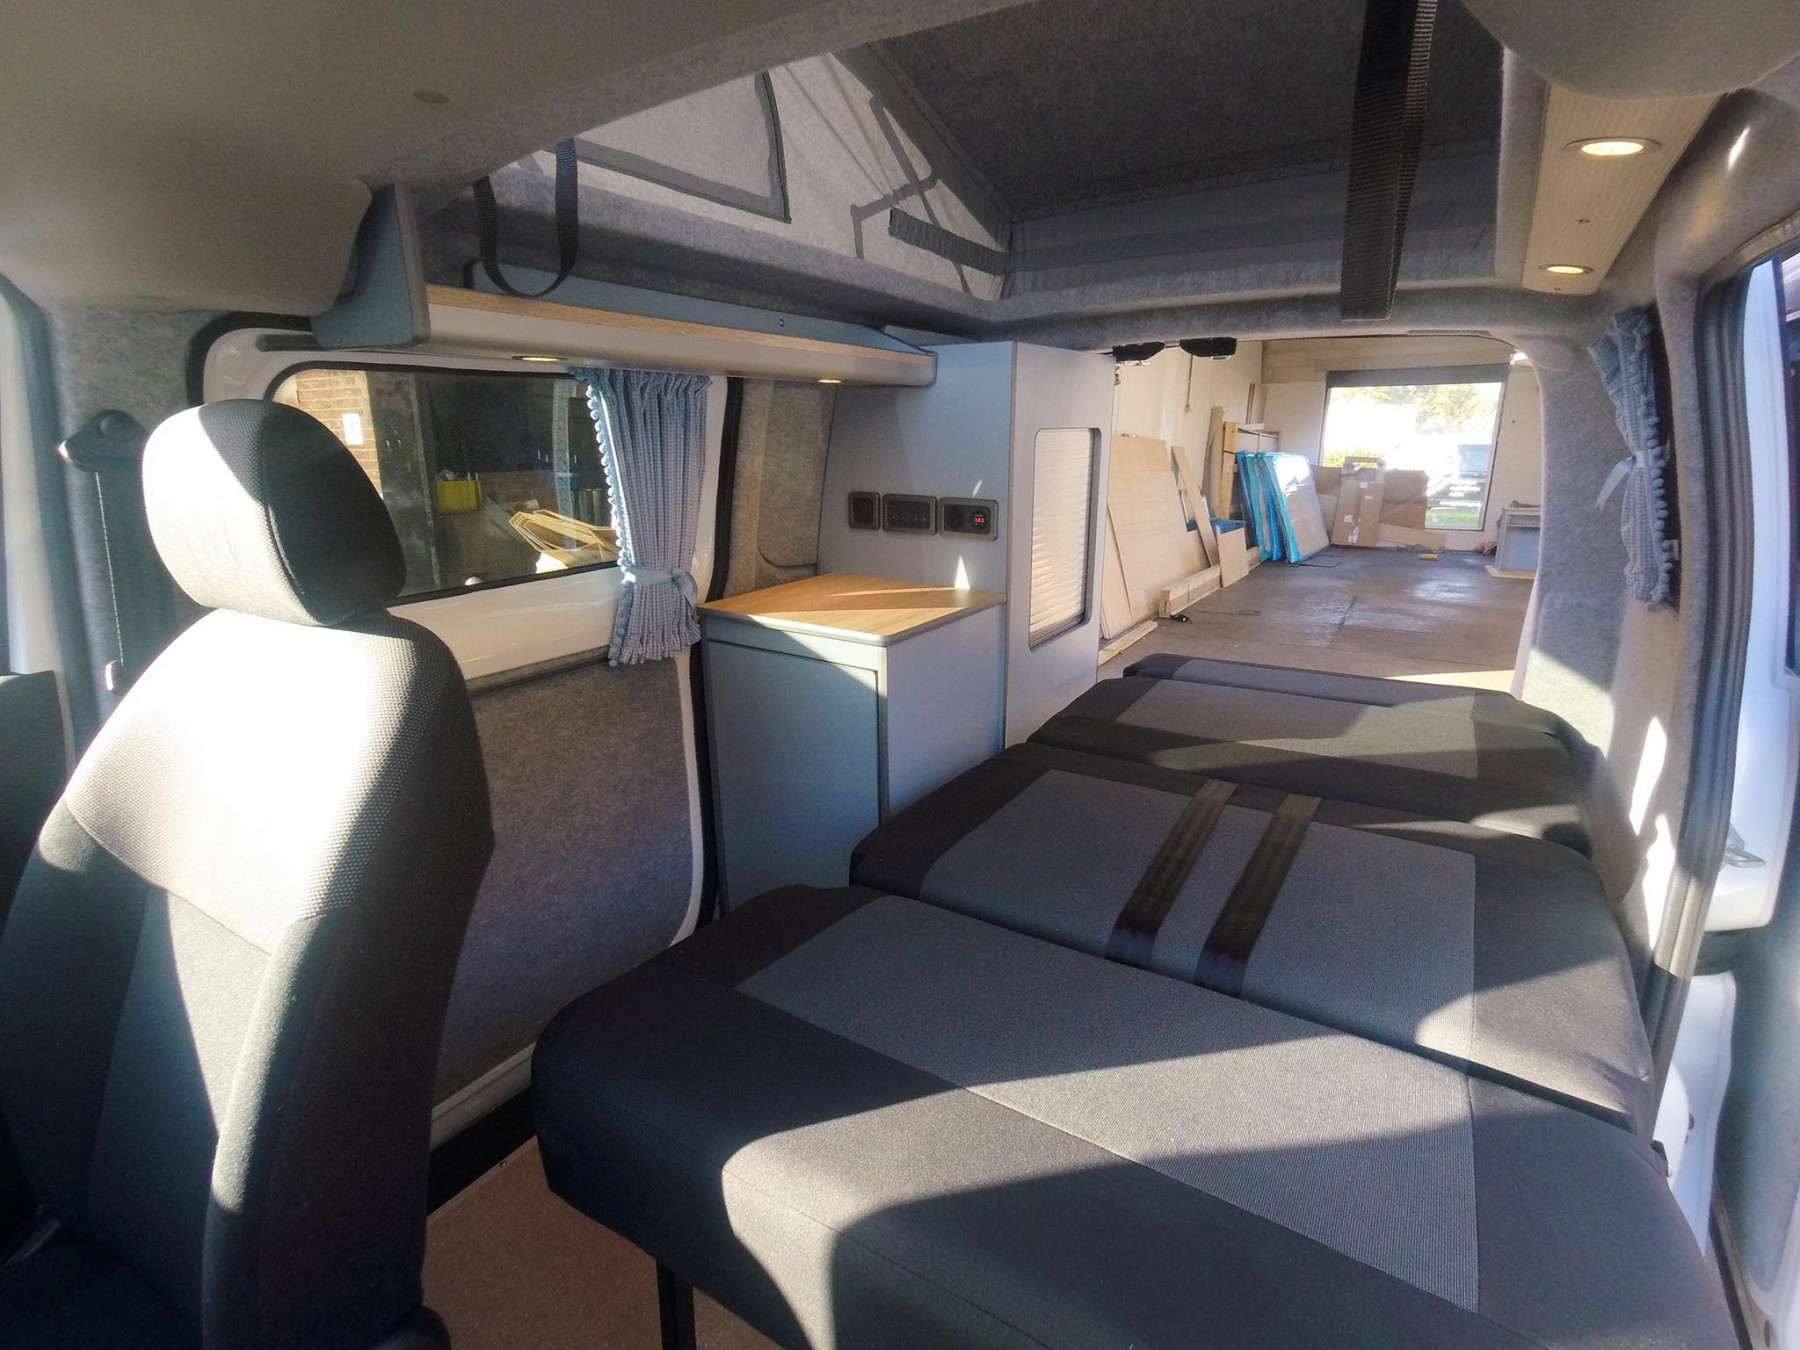 An NV200 conversion we completed